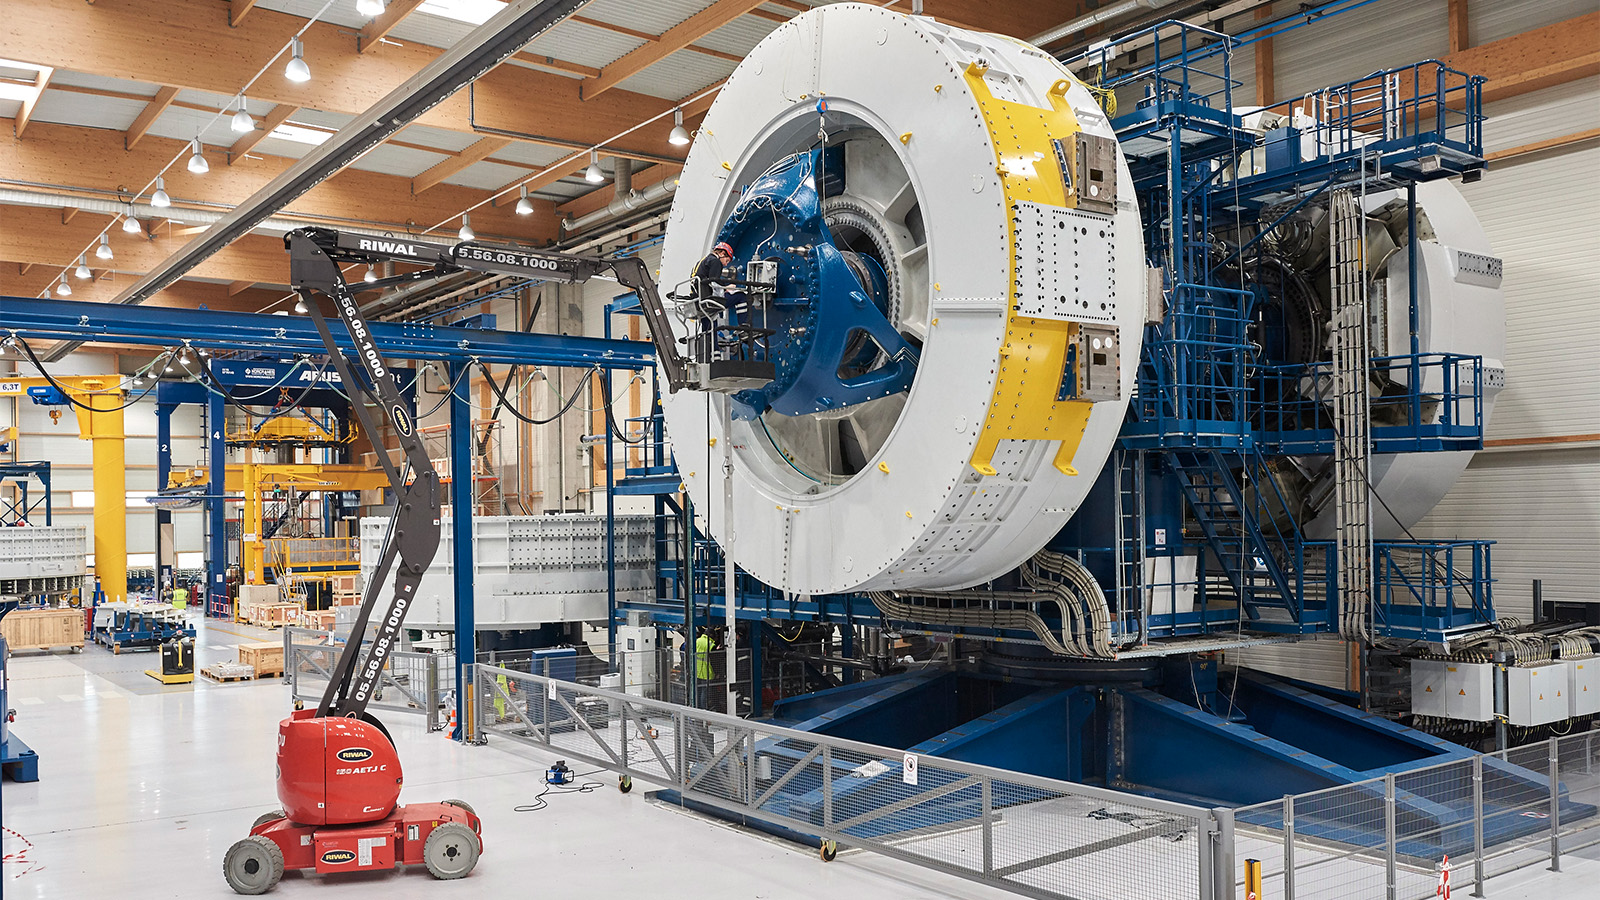 Look At The Monster Magnet Made For America’s First Offshore Wind Farm